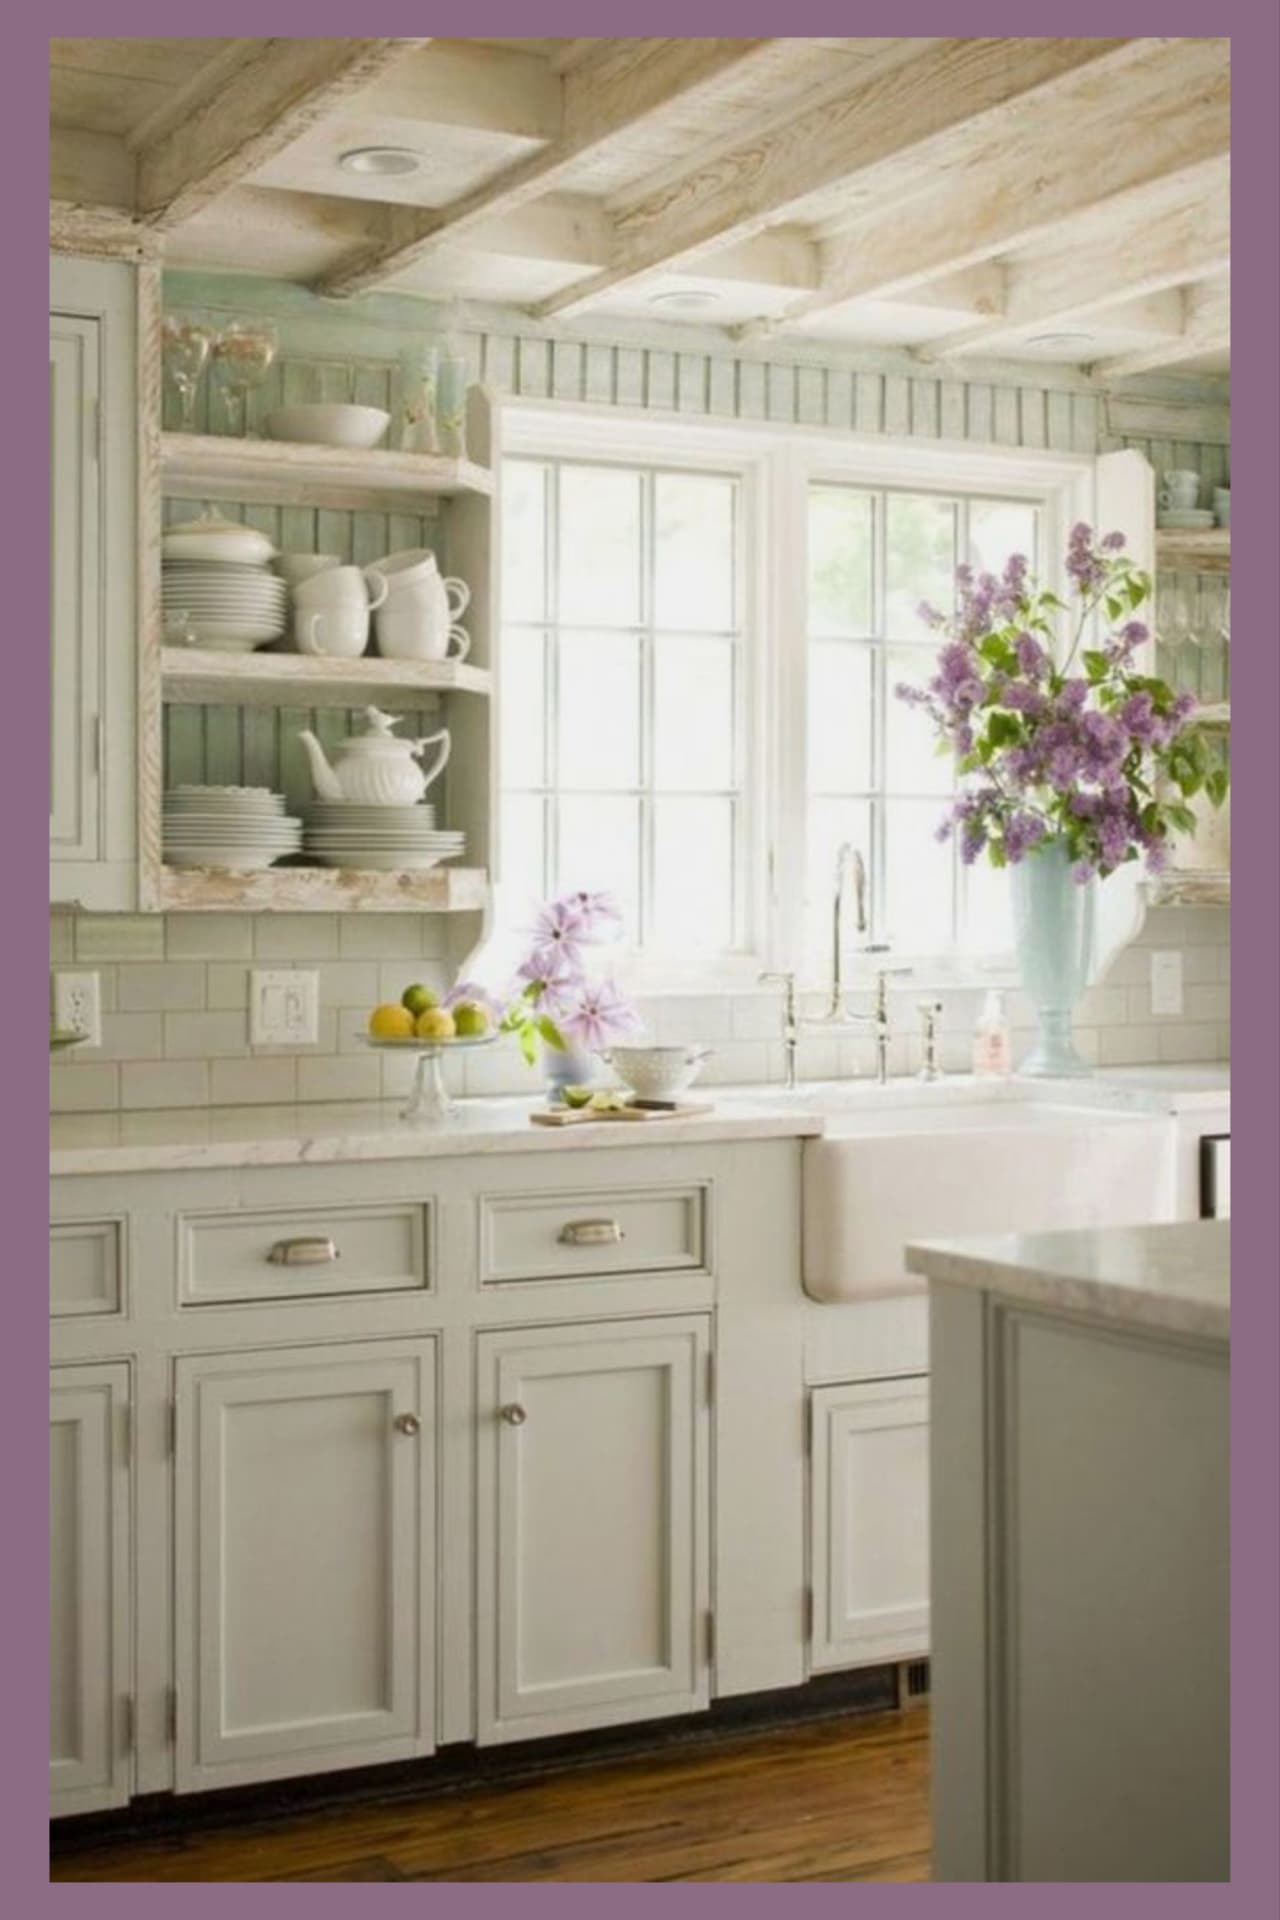 Country Cottage Kitchens - Country cottage kitchen ideas on a budget including: beach cottage kitchen ideas, modern cottage kitchen ideas, white cottage kitchen ideas, lake house kitchen cabinets and decor ideas, cabin kitchen decor ideas, country kitchen ideas for small kitchens and more kitchen decorating ideas on a budget